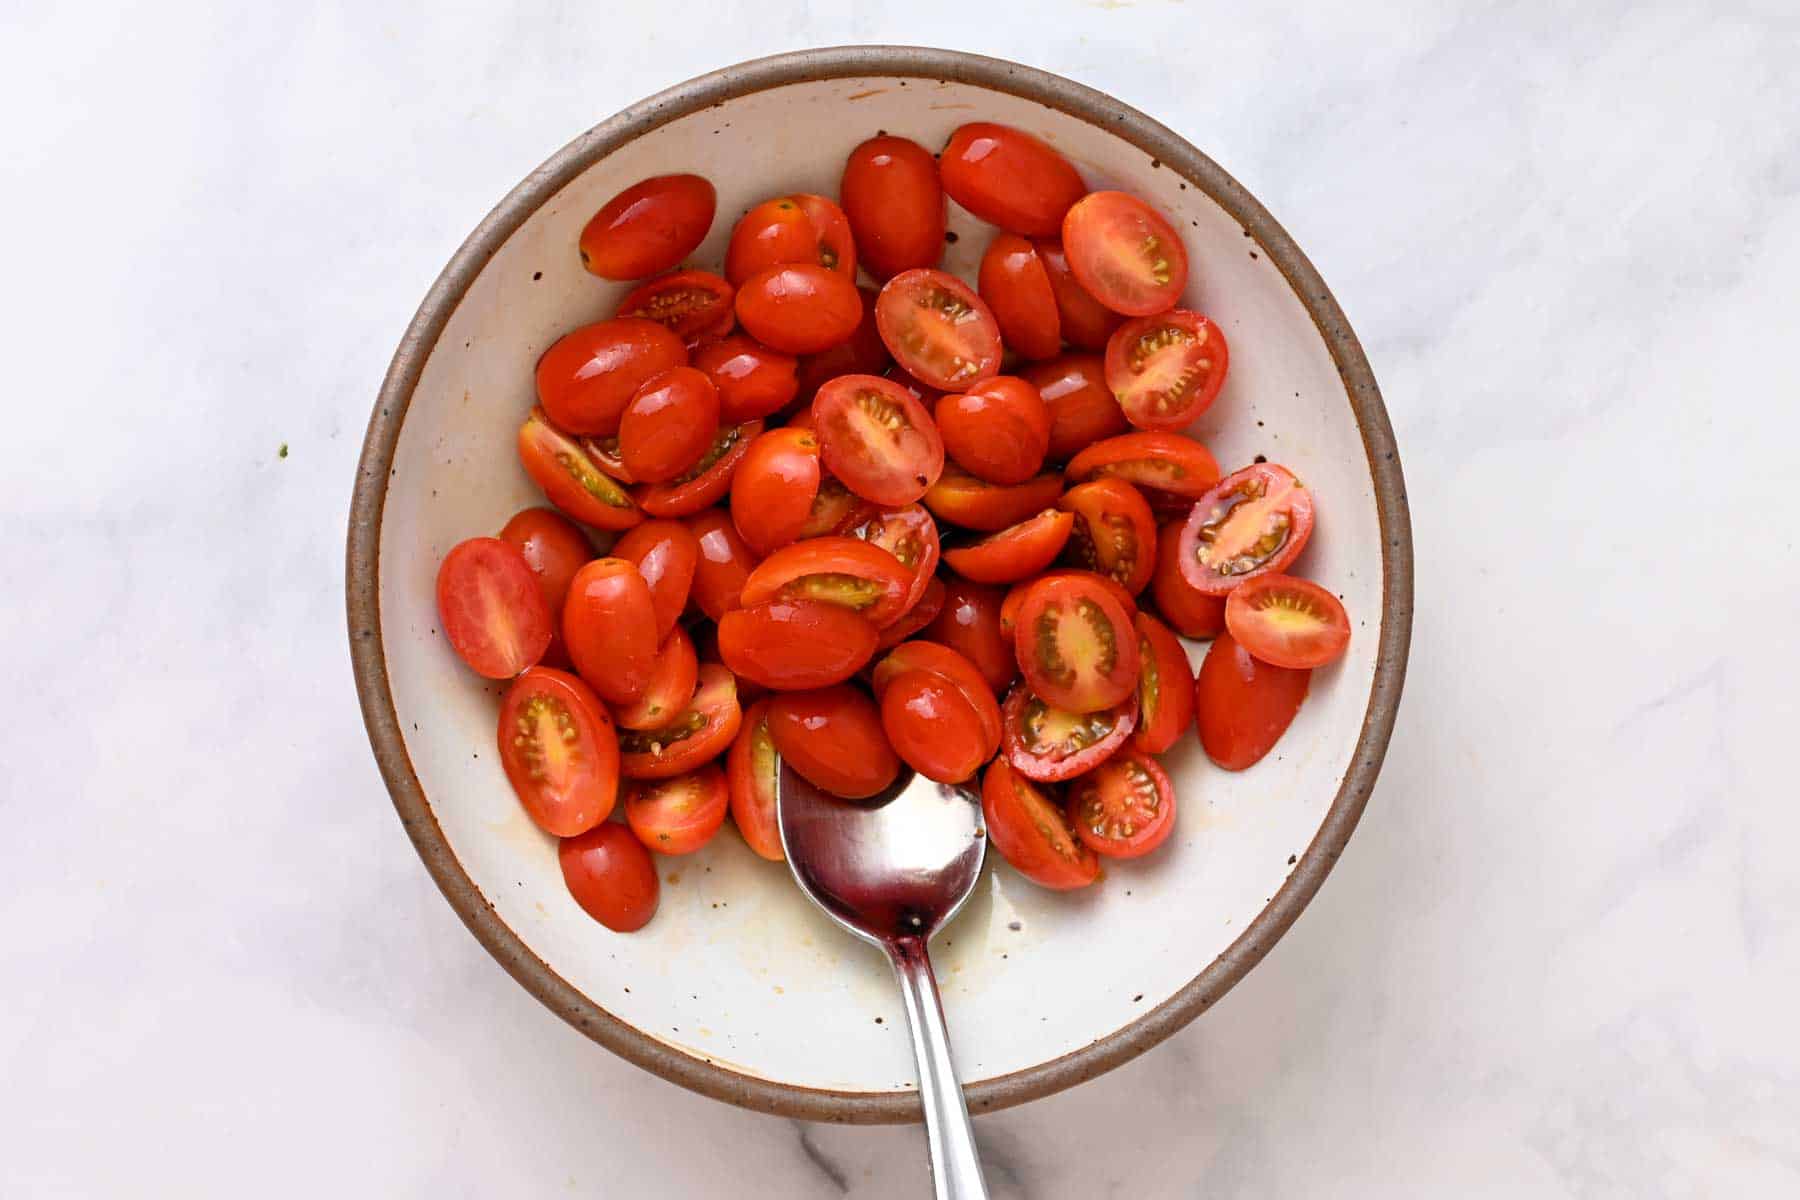 Brown-rimmed white bowl filled with cherry tomatoes tossed in balsamic vinegar and a metal spoon.